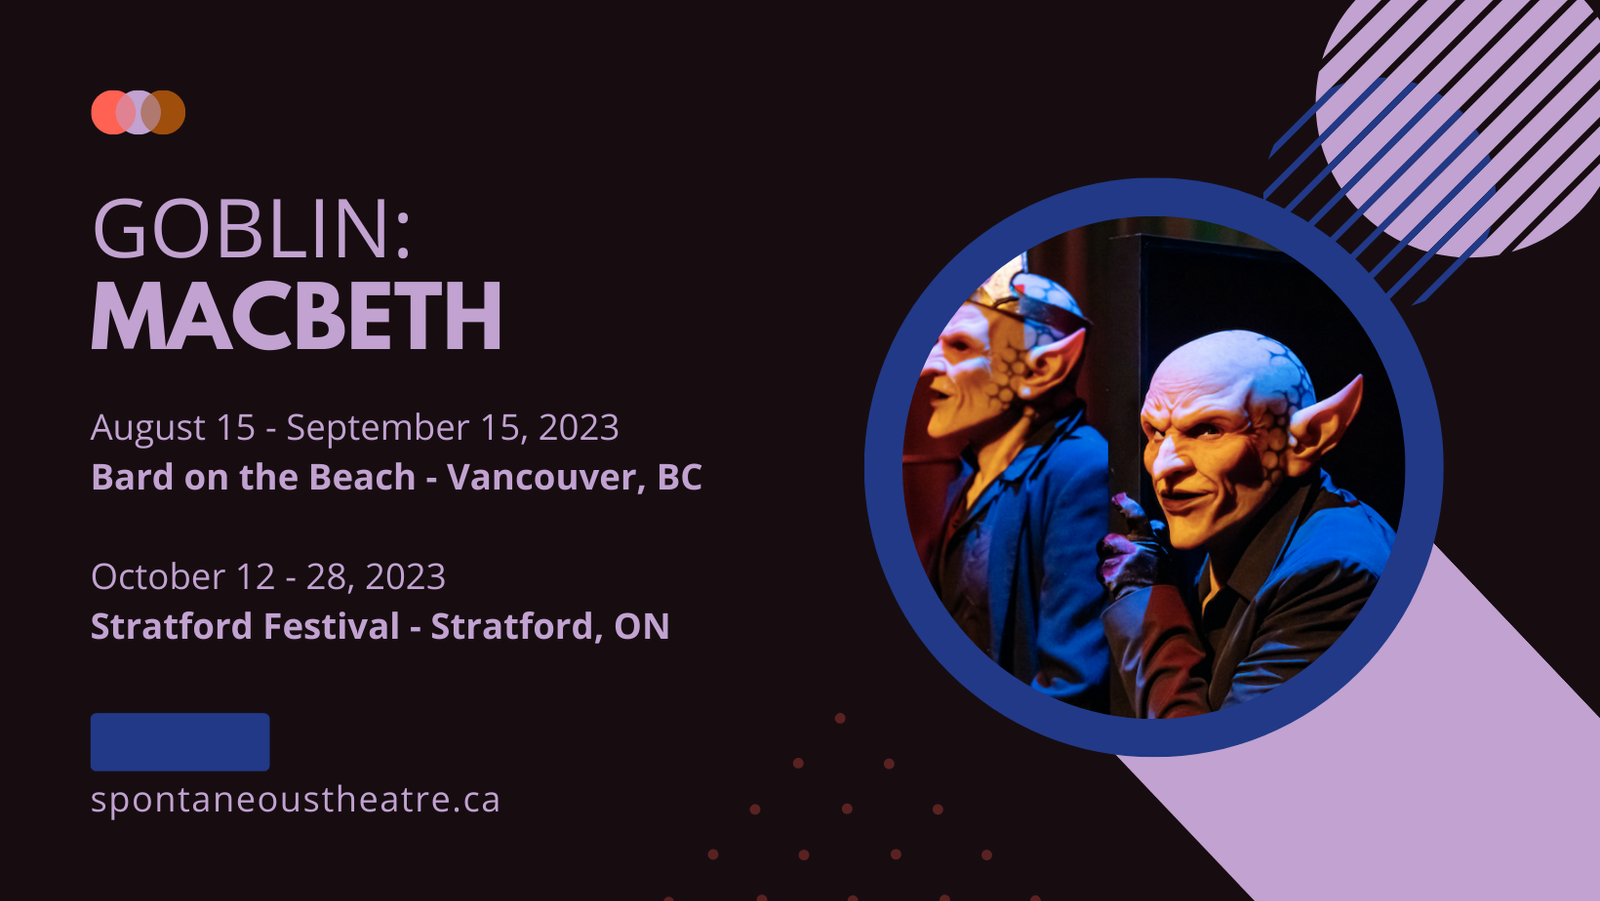 Banner for Goblin: Macbeth appearing at Bard on the Beach in Vancouver and The Stratford Festival, Stratford